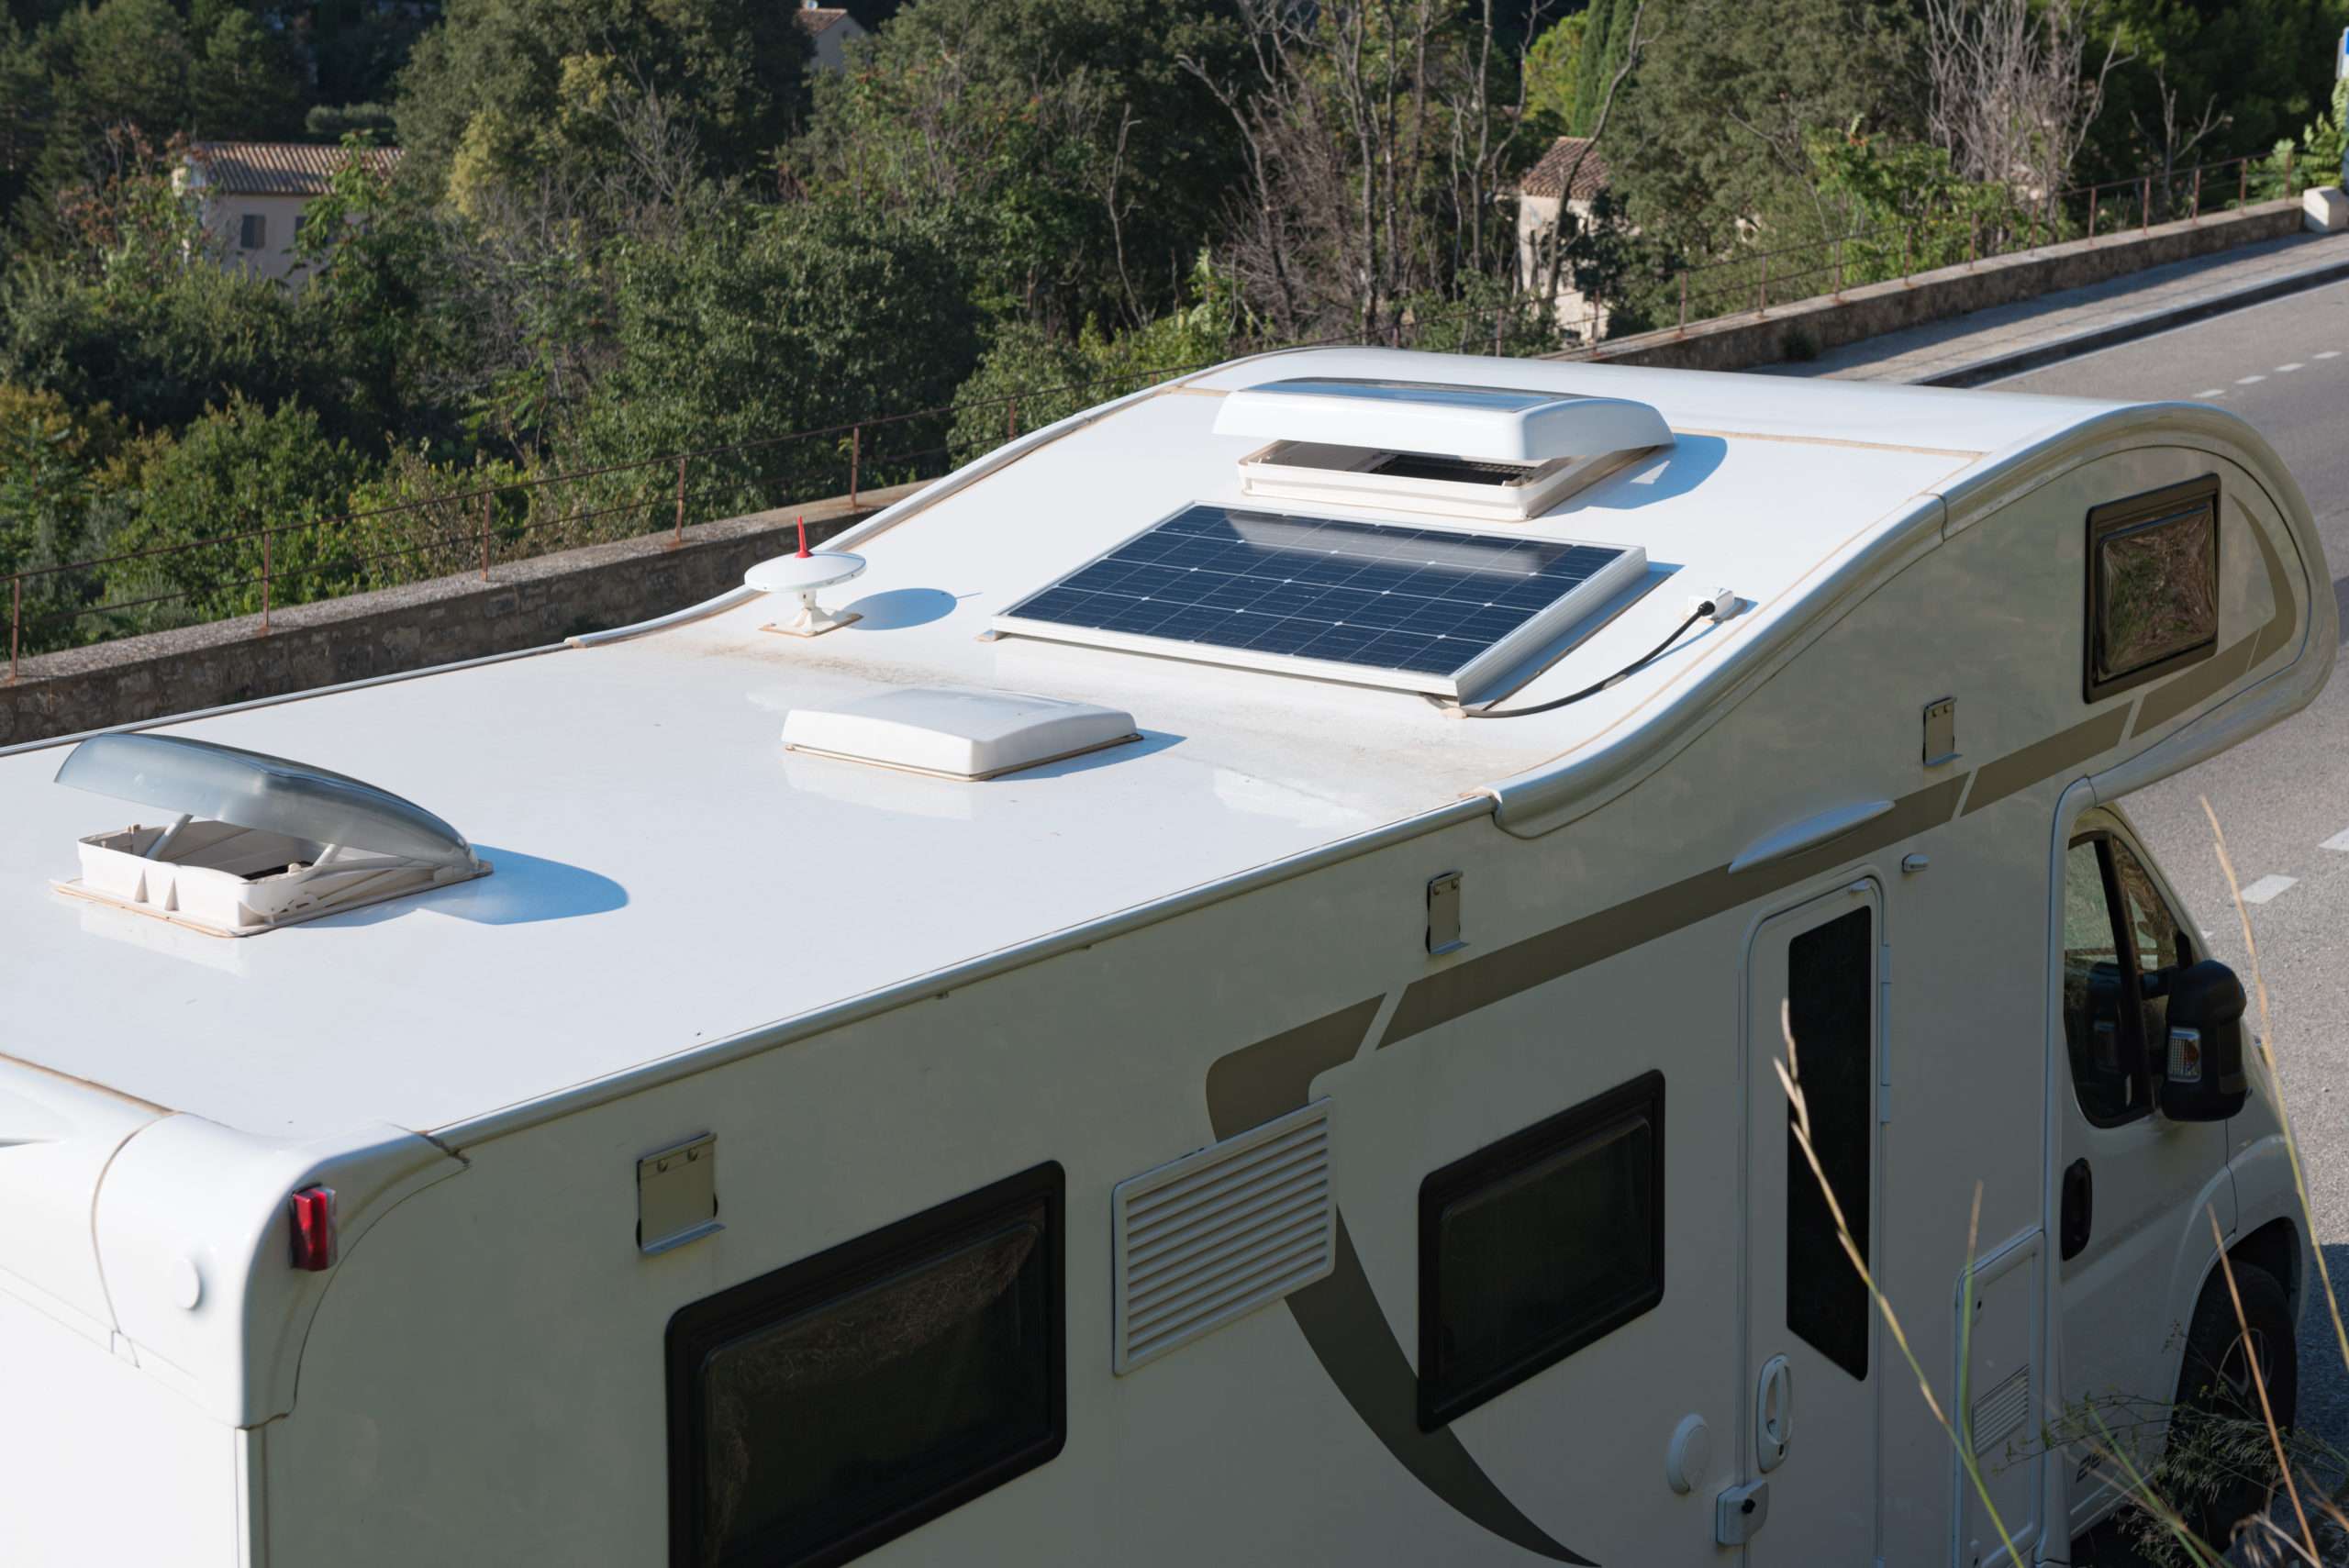 Top View of Motorhome Roof showing solar panels and ventilation